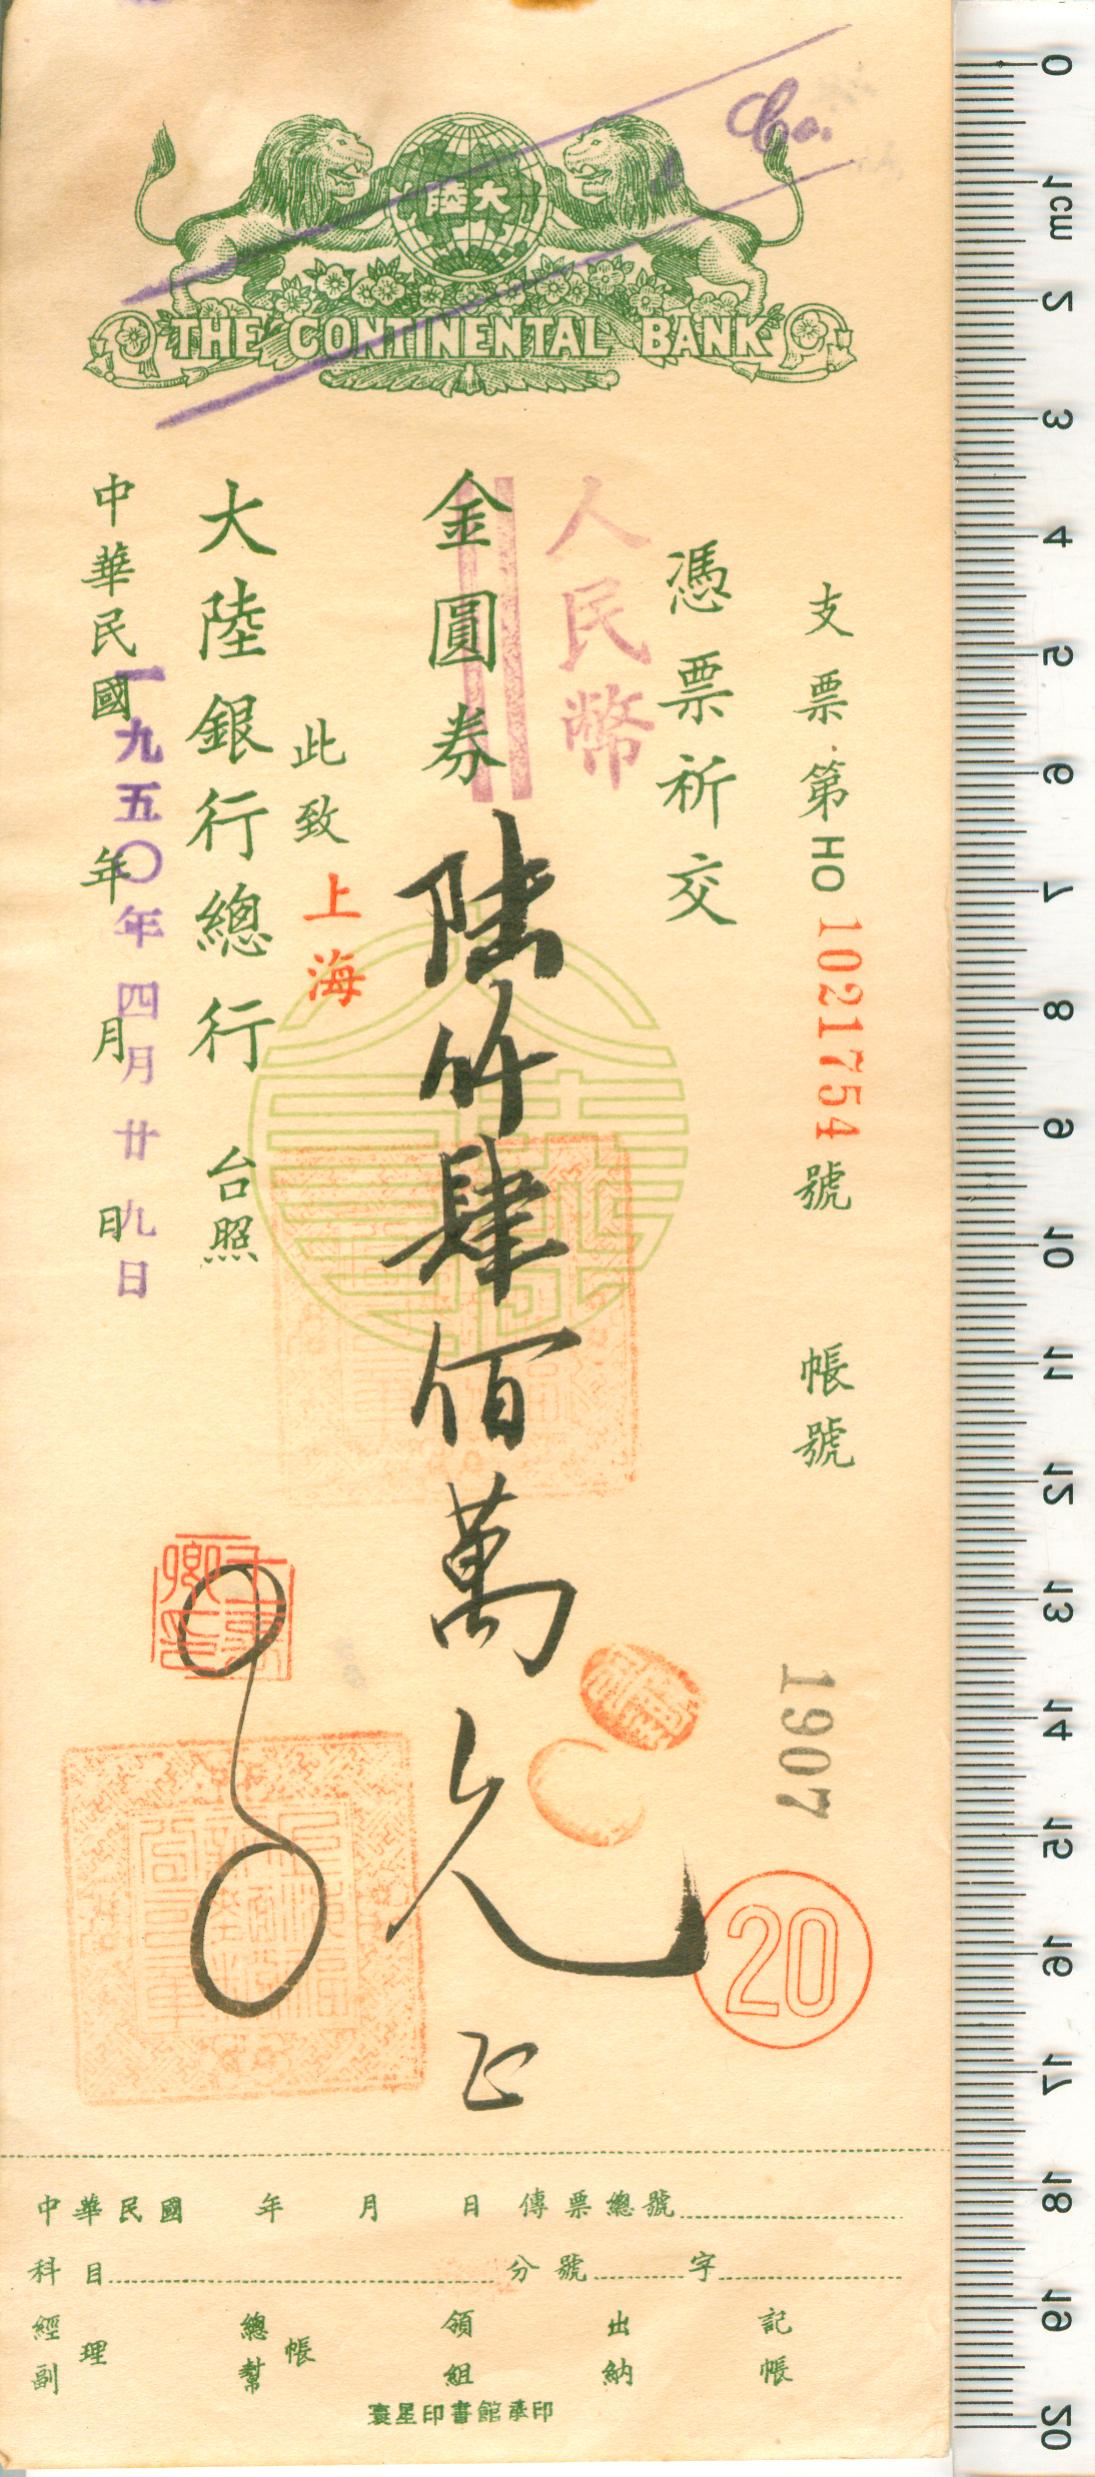 D1780, Check of The Contimental Bank, China 1950 Cheque